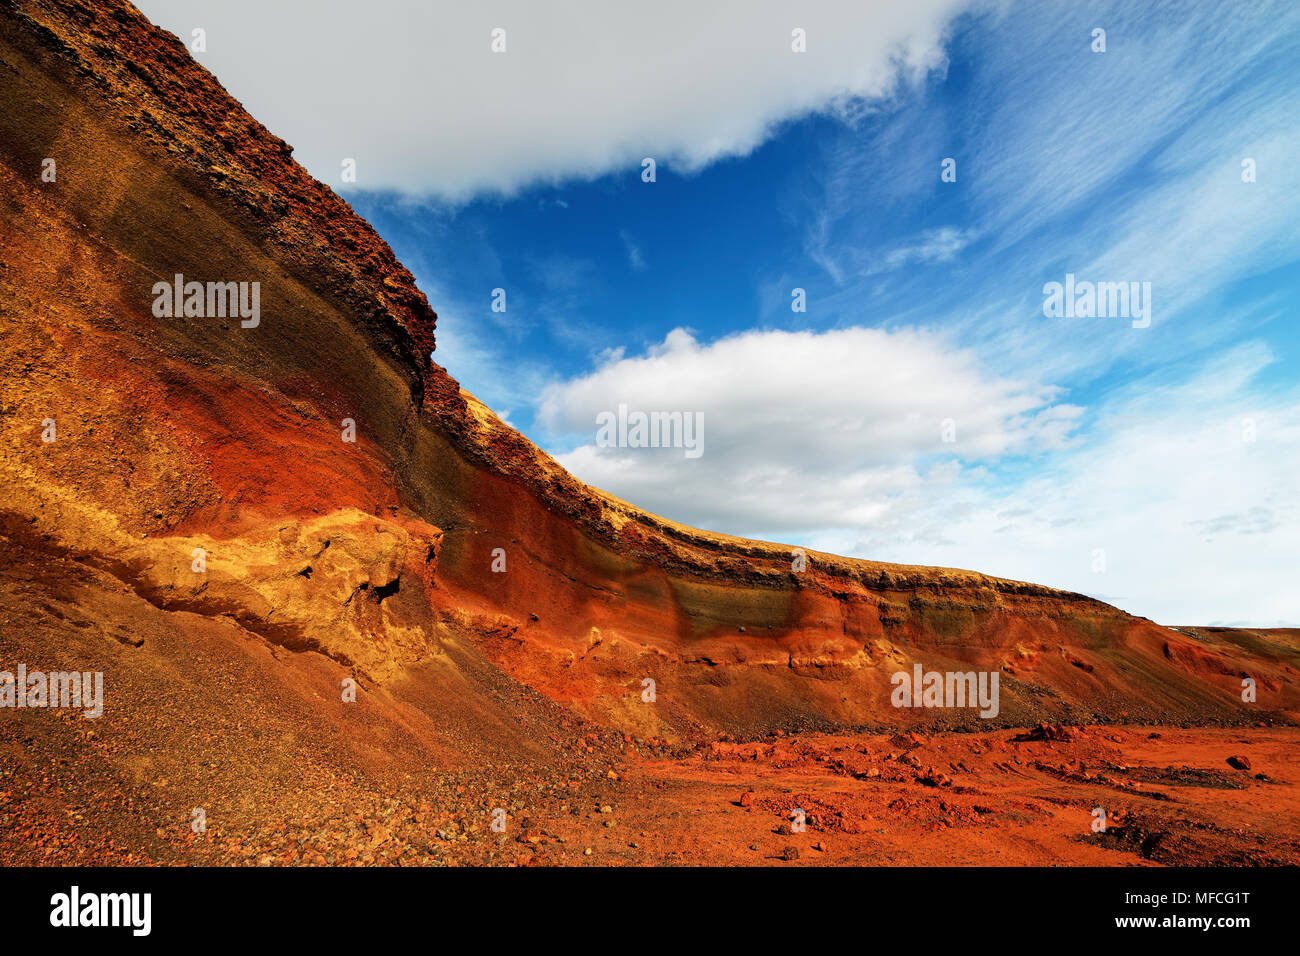 Colorful deposits of volcanic ash in reds and yellows against a green hill, above blue sky with clouds - Location: Iceland, Golden Circle Stock Photo